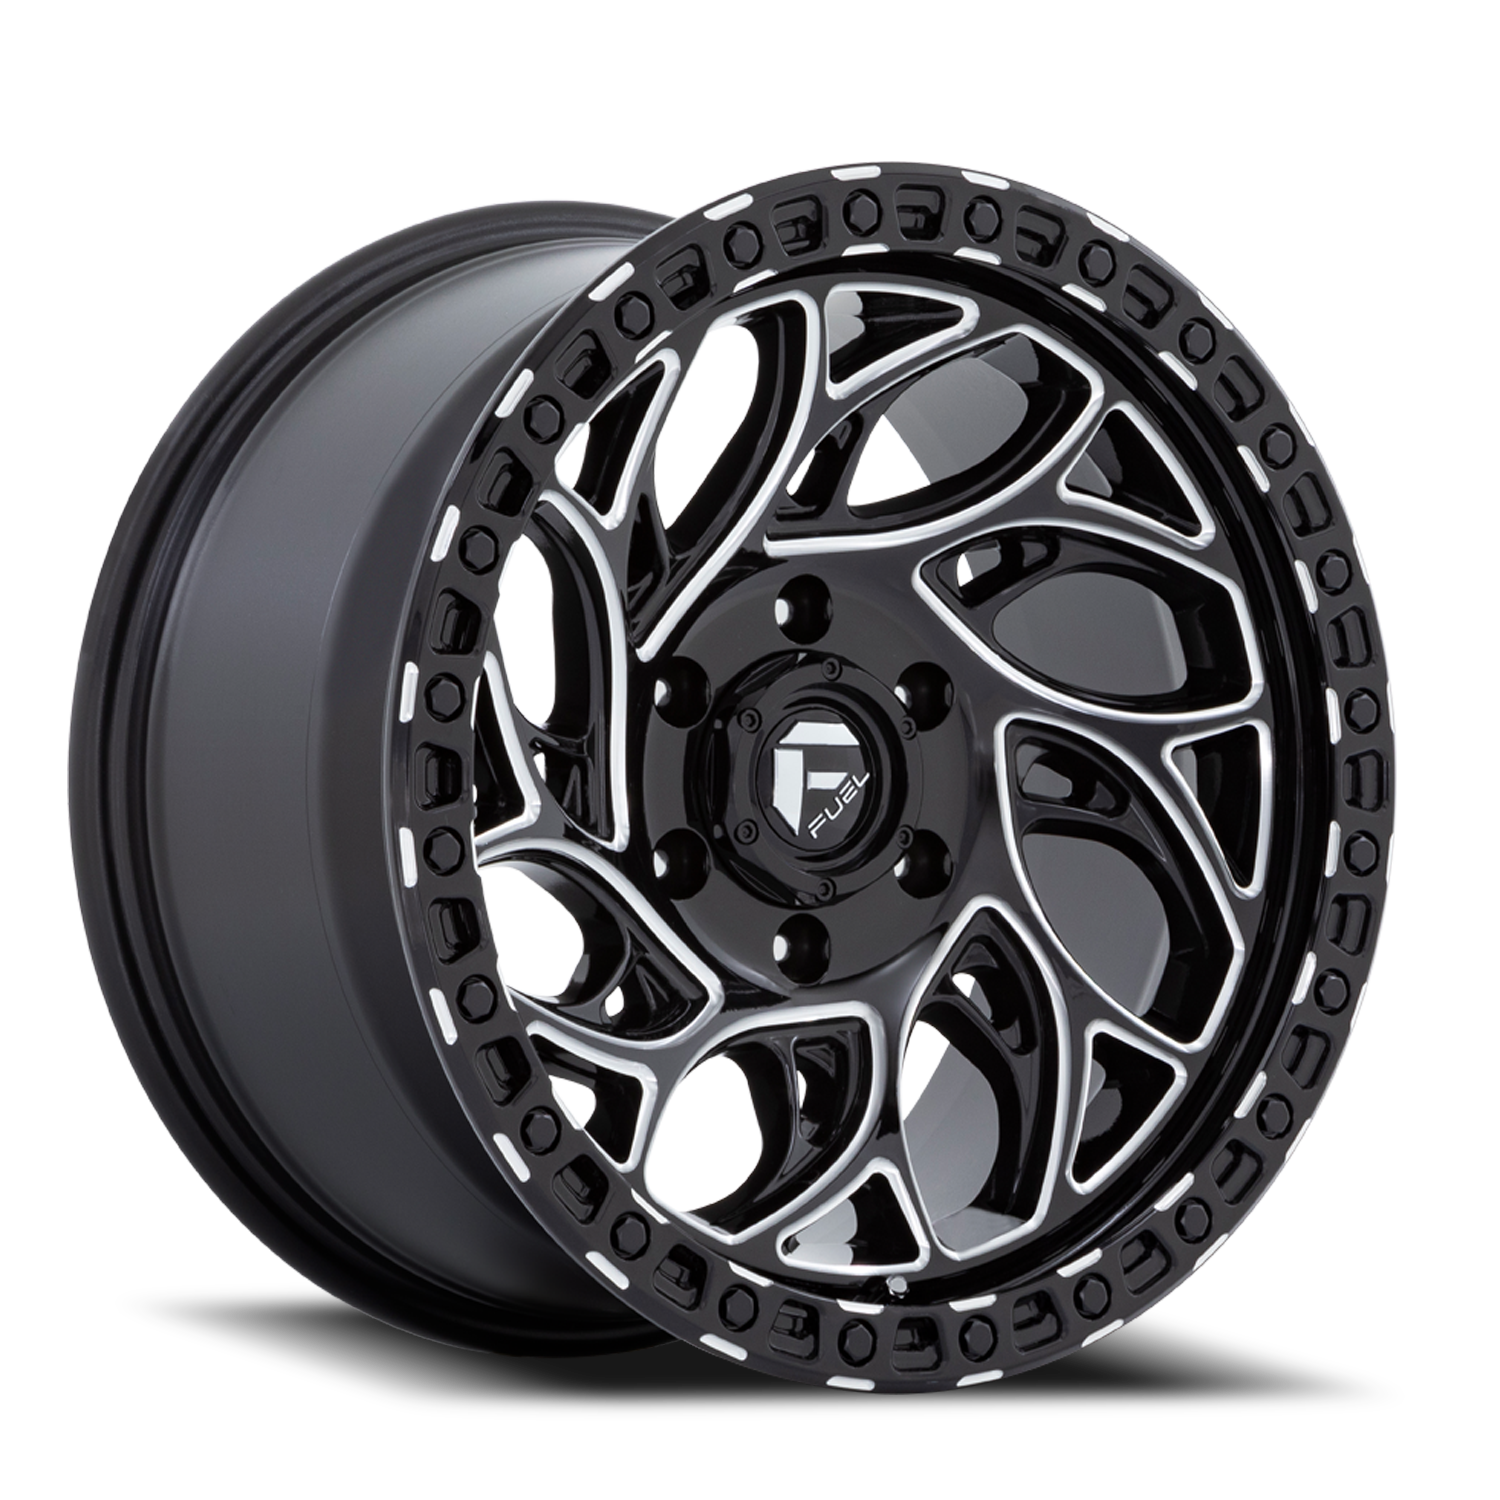 Aluminum Wheels 15X10 Runner OR D840 6 On 139.7 Gloss Black Milled 108 Bore -43 Offset Fuel Off Road Wheels